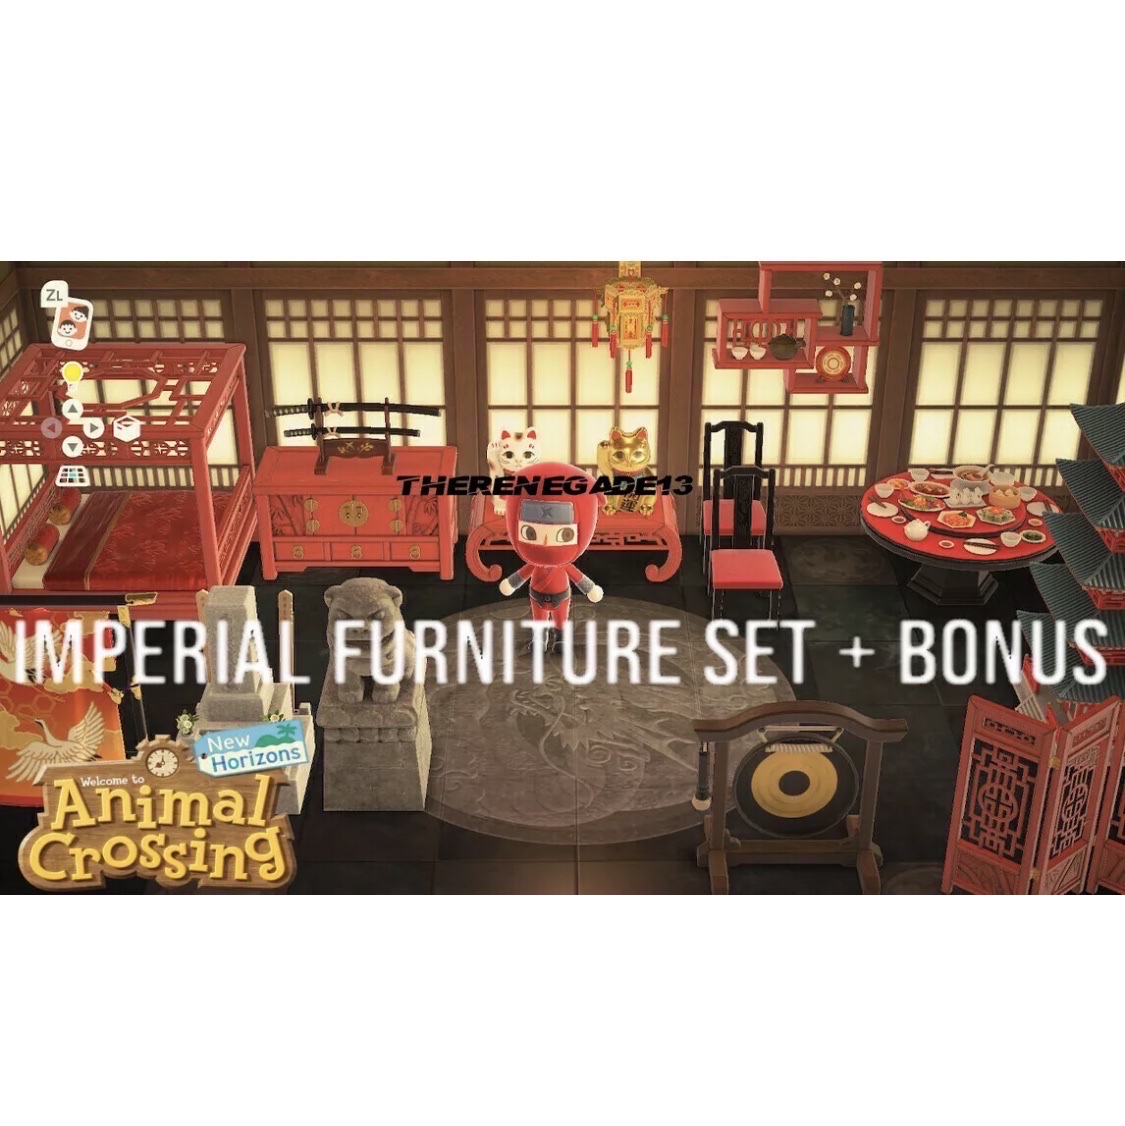 Complete Imperial Furniture Set 21 Items Animal Crossing New